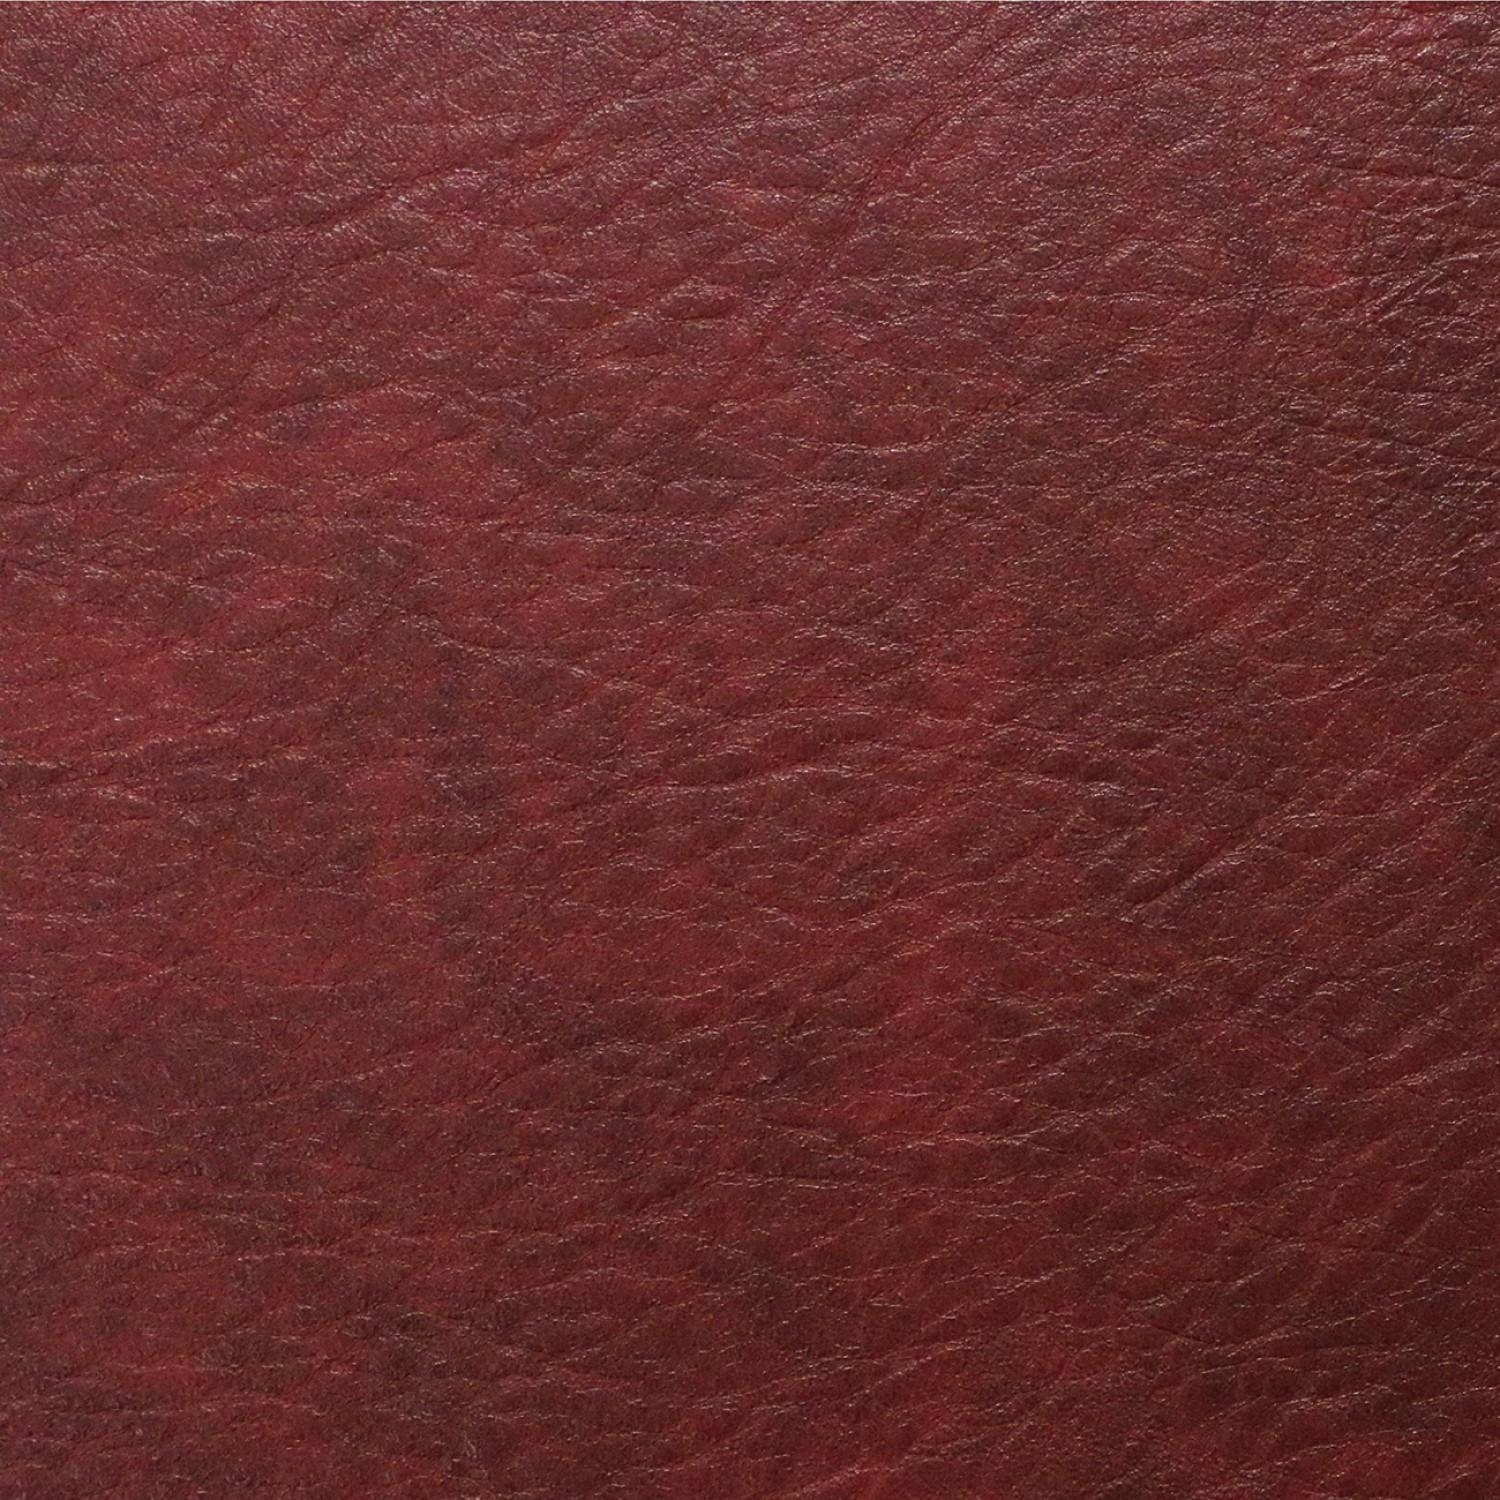 Legacy Faux Leather in Cherry - 1/2 yard